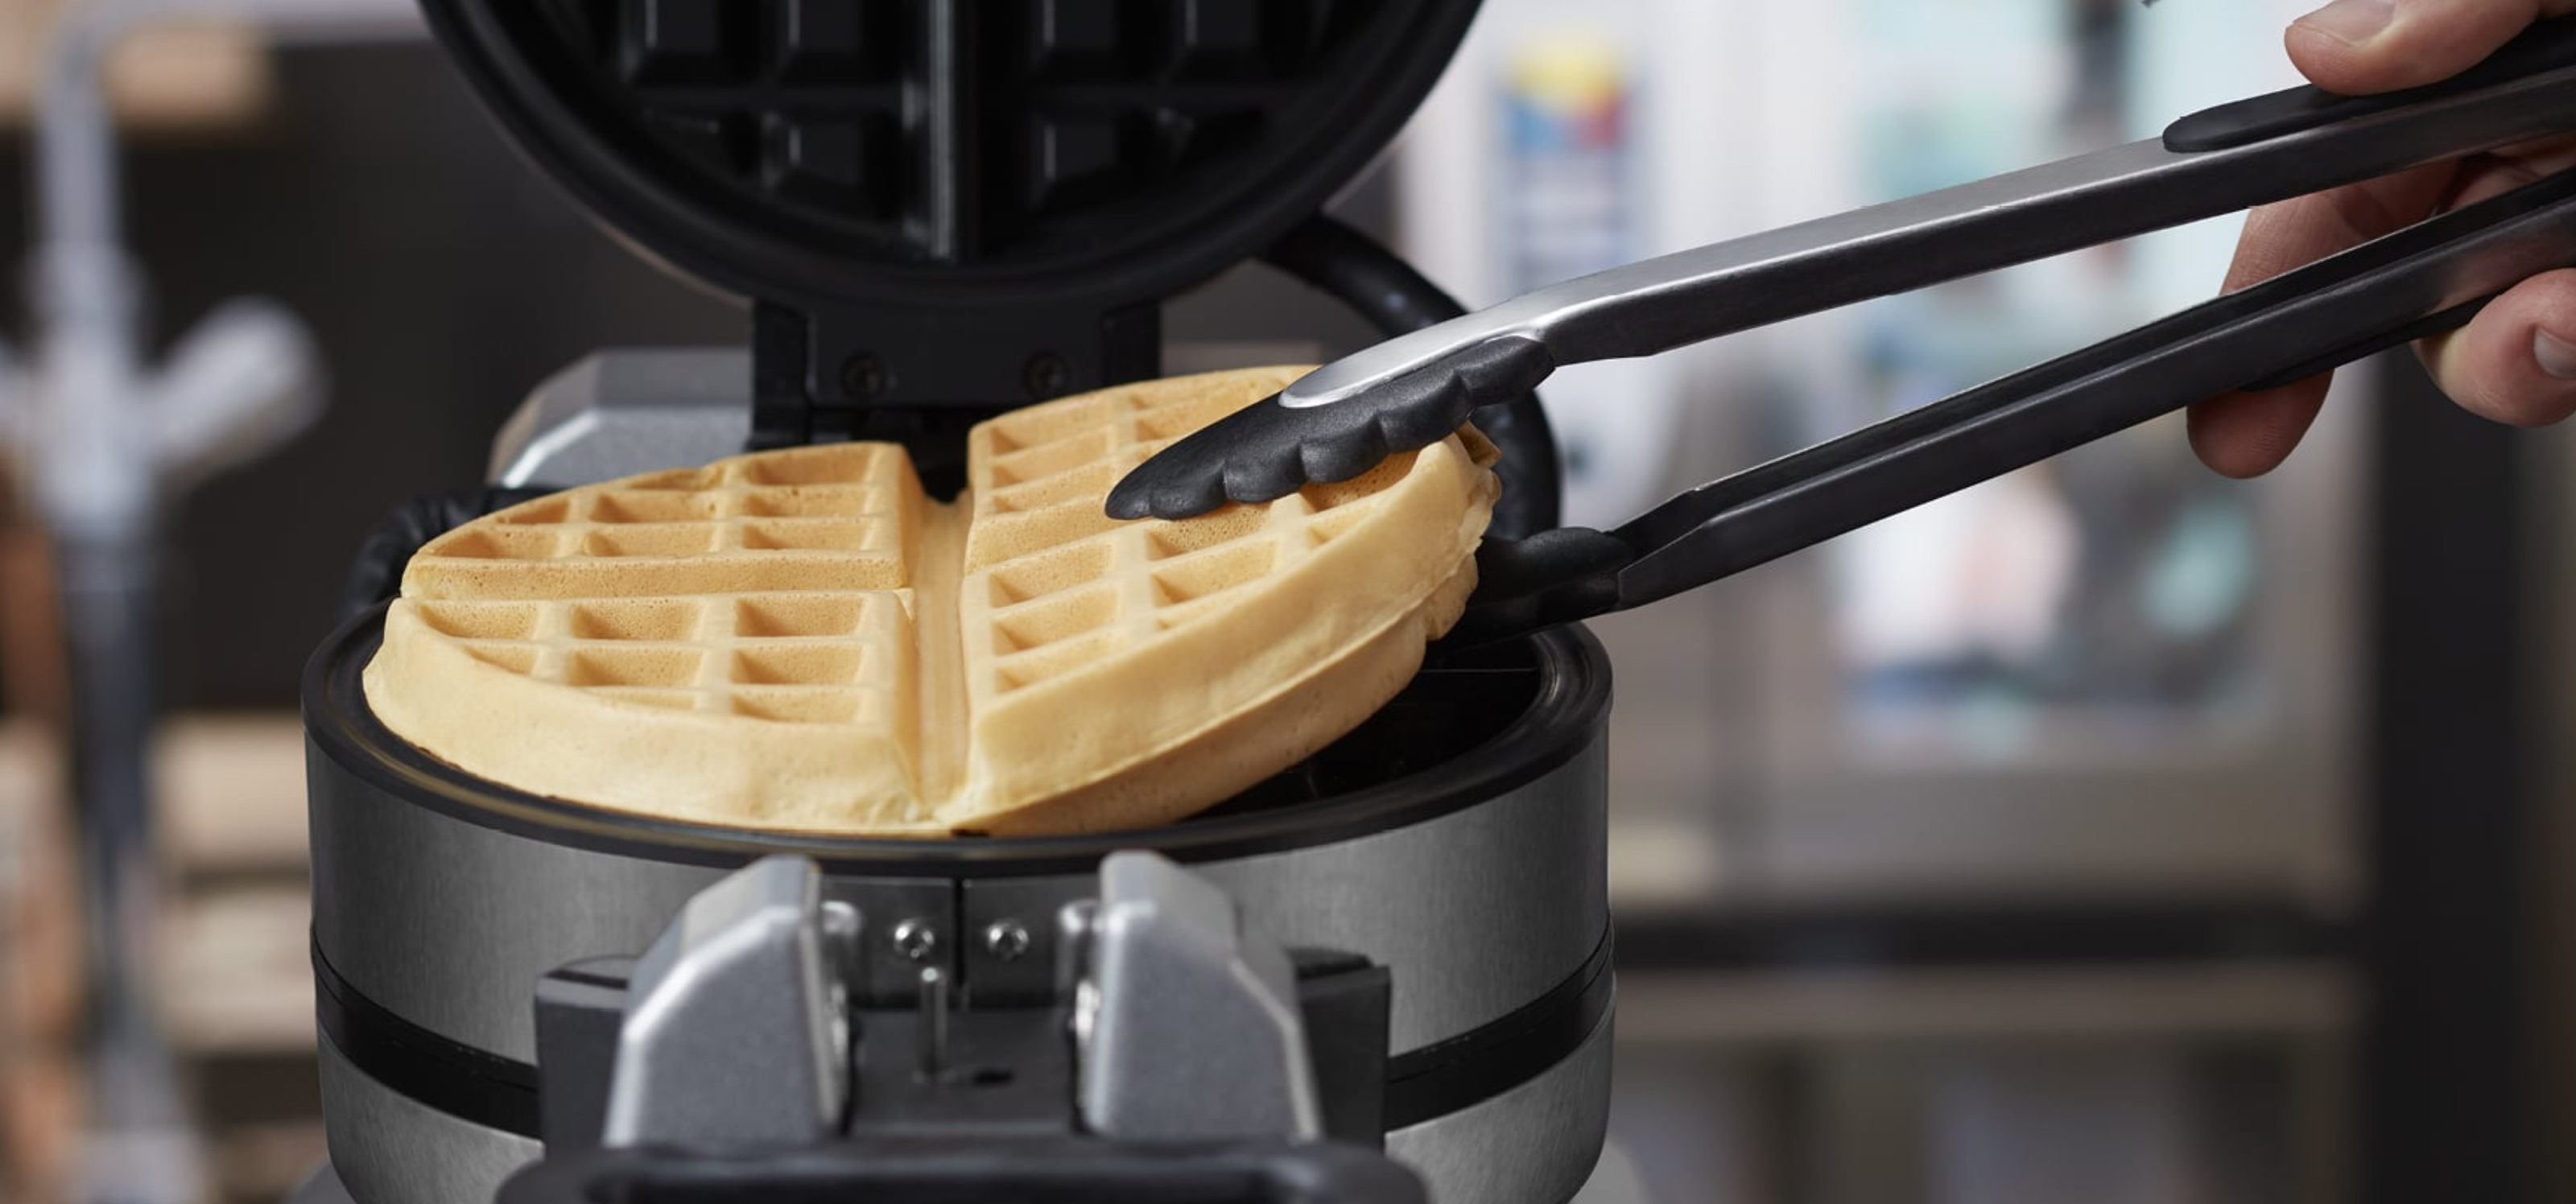 commercial-kitchen-equipment-waffle-maker